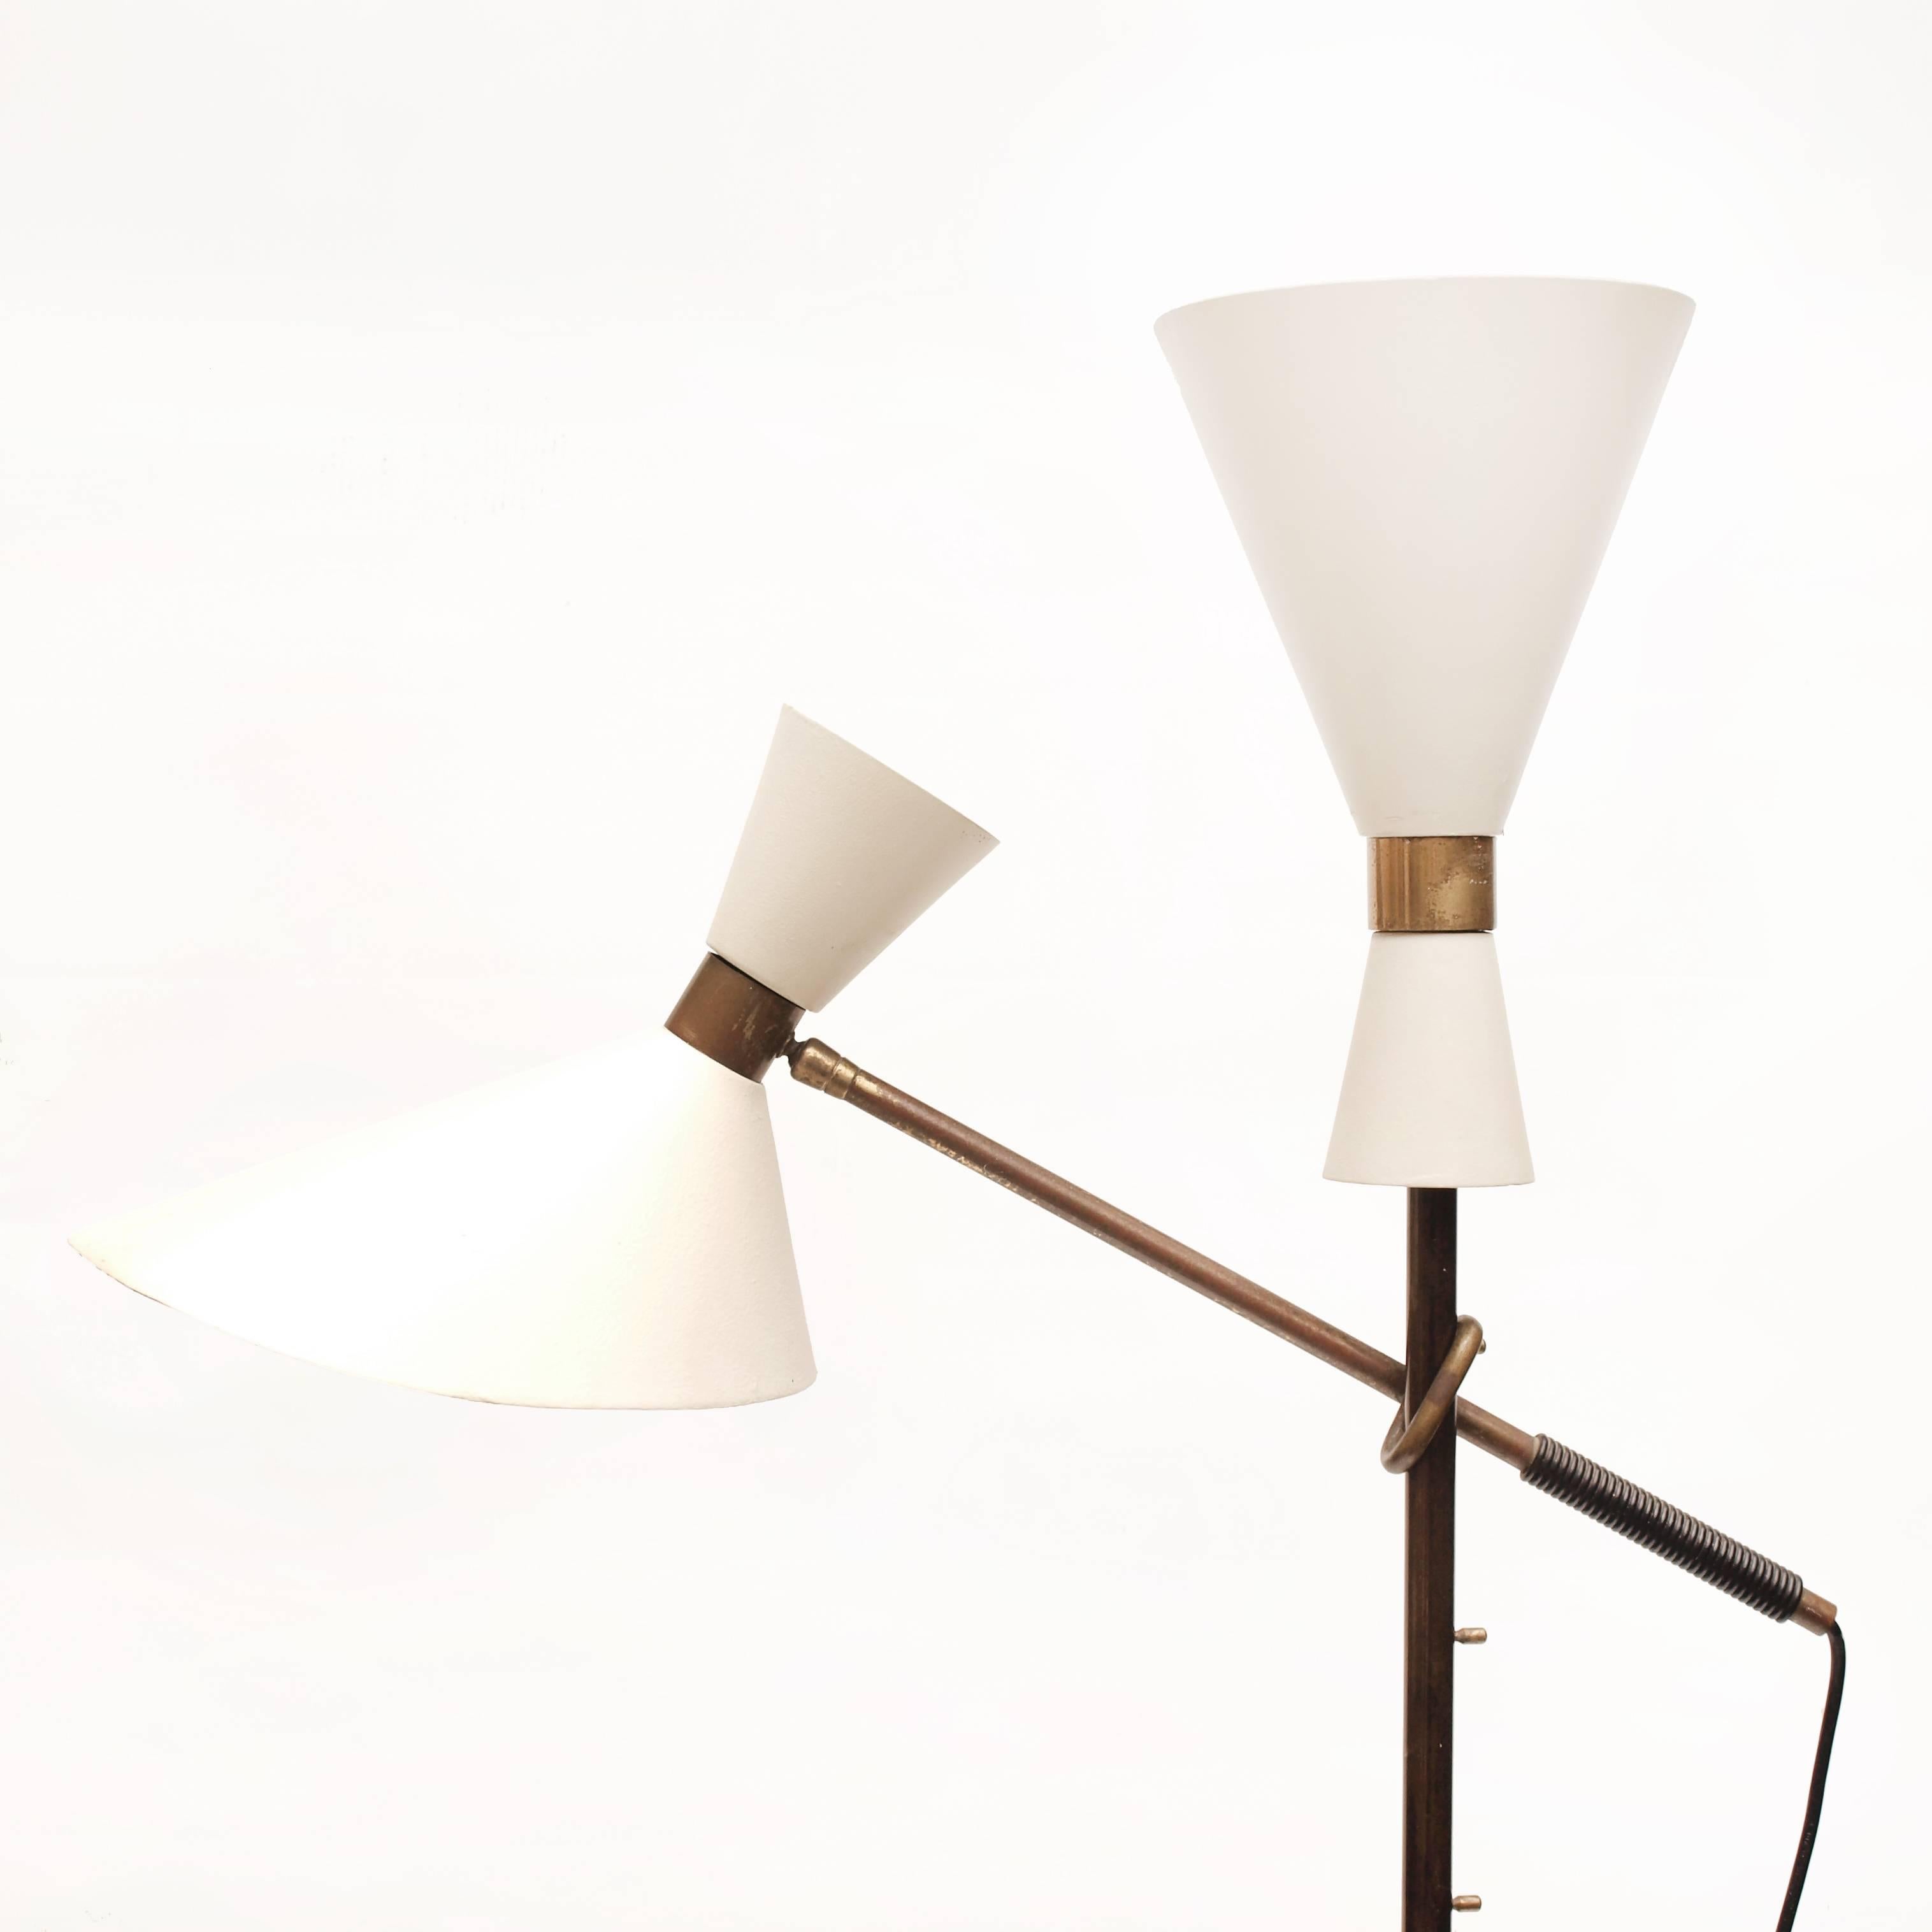 An iconic 'Pelikan' floor lamp by the Austrian designer Julius Theodor Kalmar and produced in Vienna, Austria. 
The architectural form is crafted of brass and lacquered metal with original off-white painted metal shades. The light has a unique